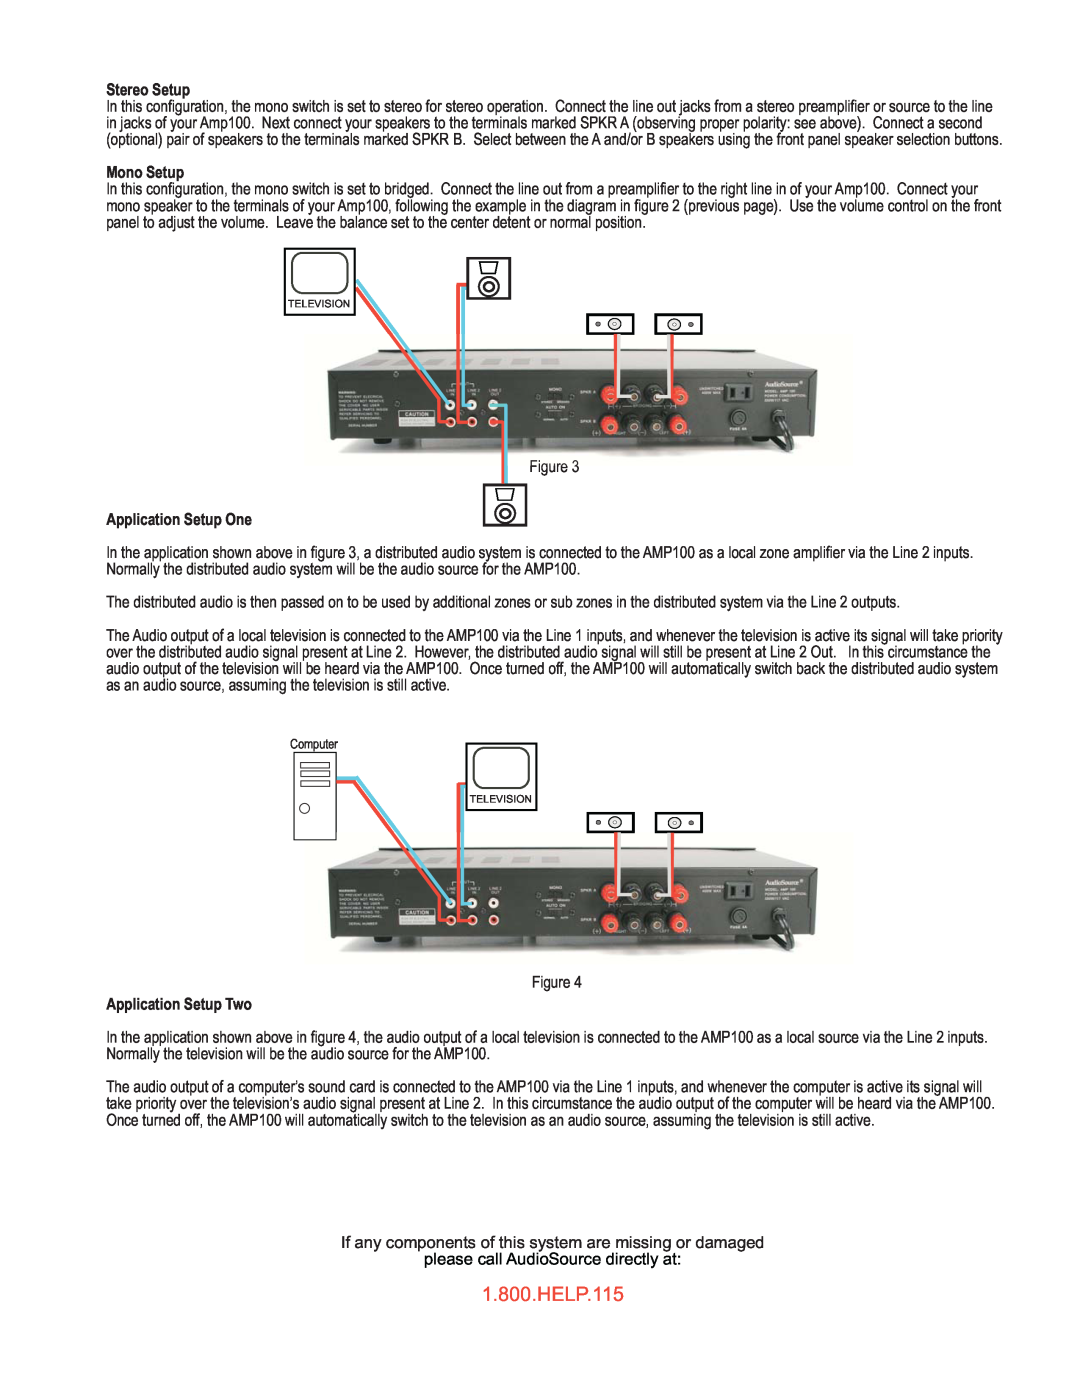 AudioSource 2 Channel Amplifier With Auto Switching Dual Inputs Stereo Setup, Mono Setup, Application Setup One, HELP.115 